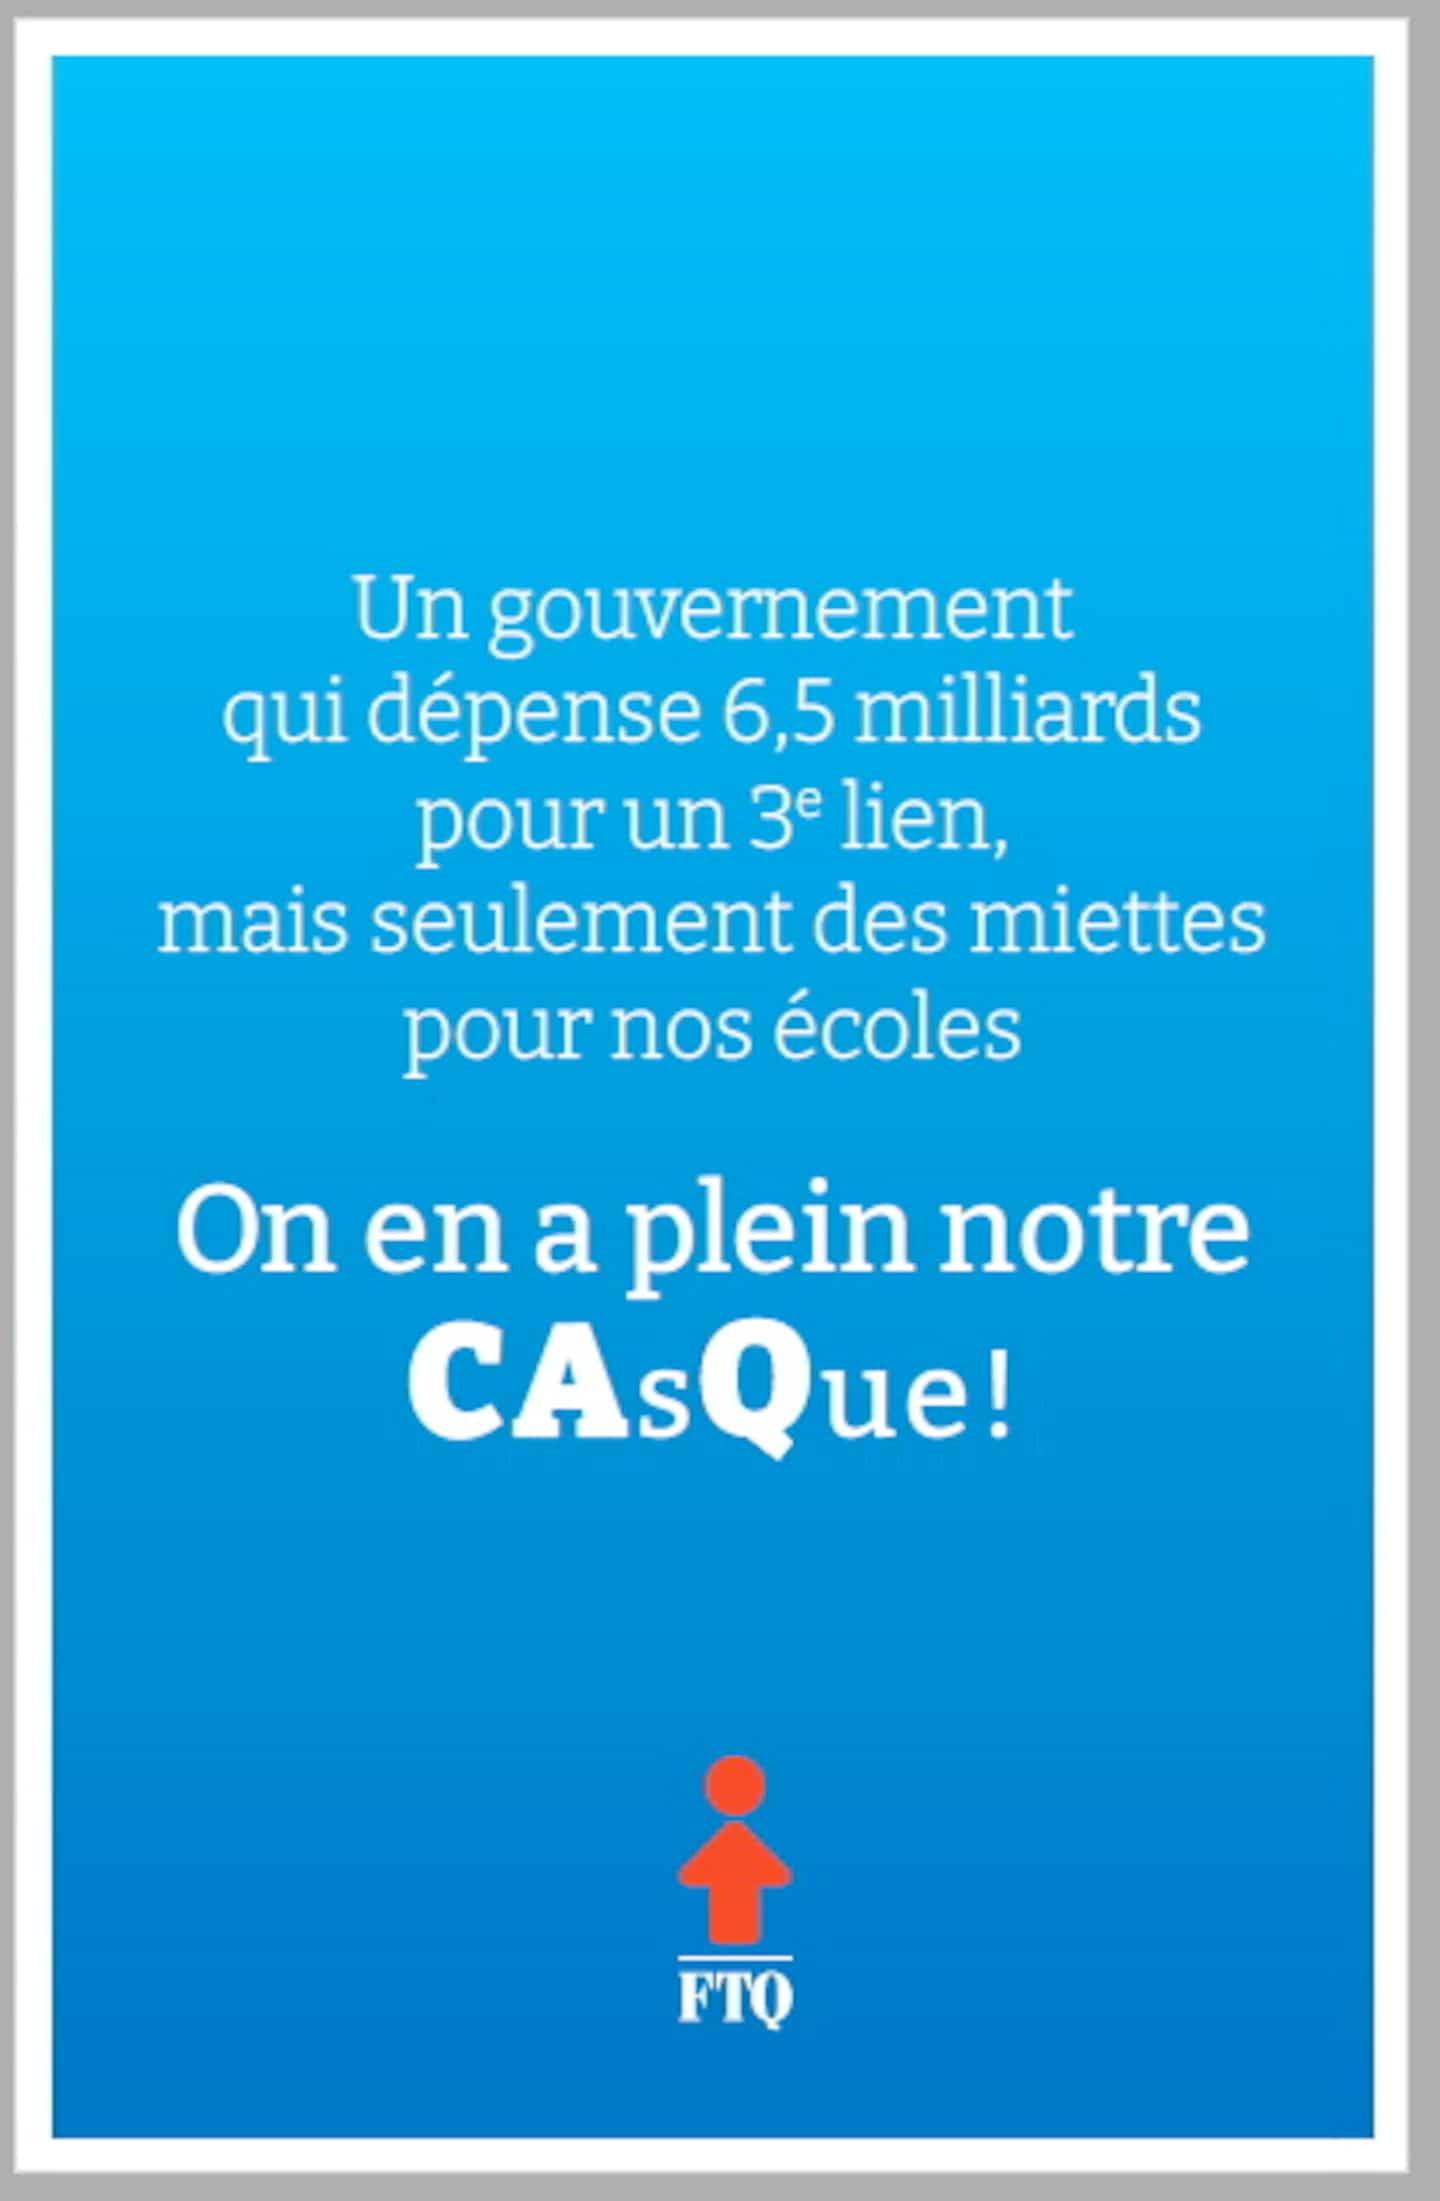 The FTQ goes to war against the CAQ government